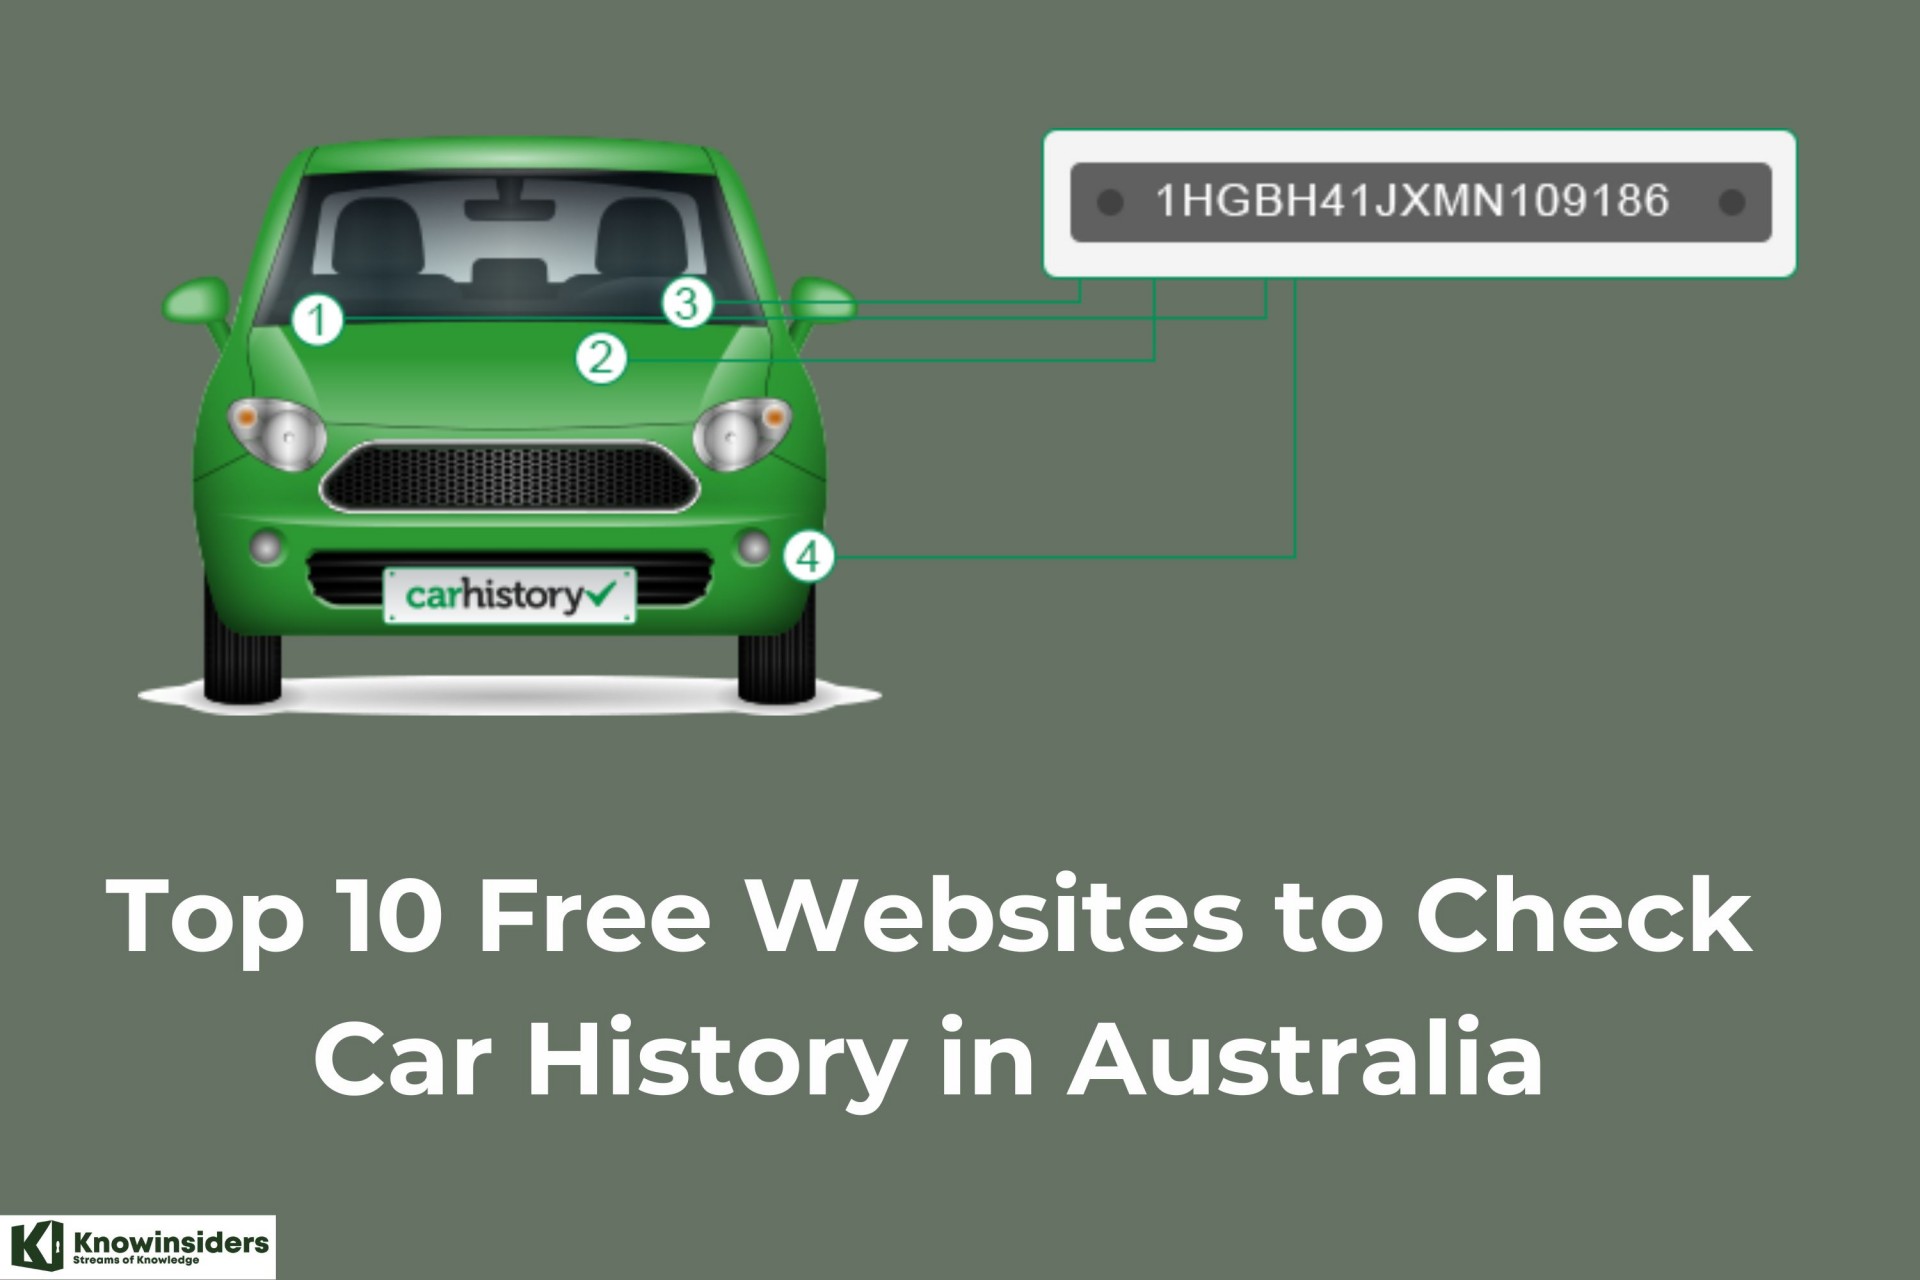 How to Check A Car History in Australia - Top 10 Free Websites to Find the PPSR